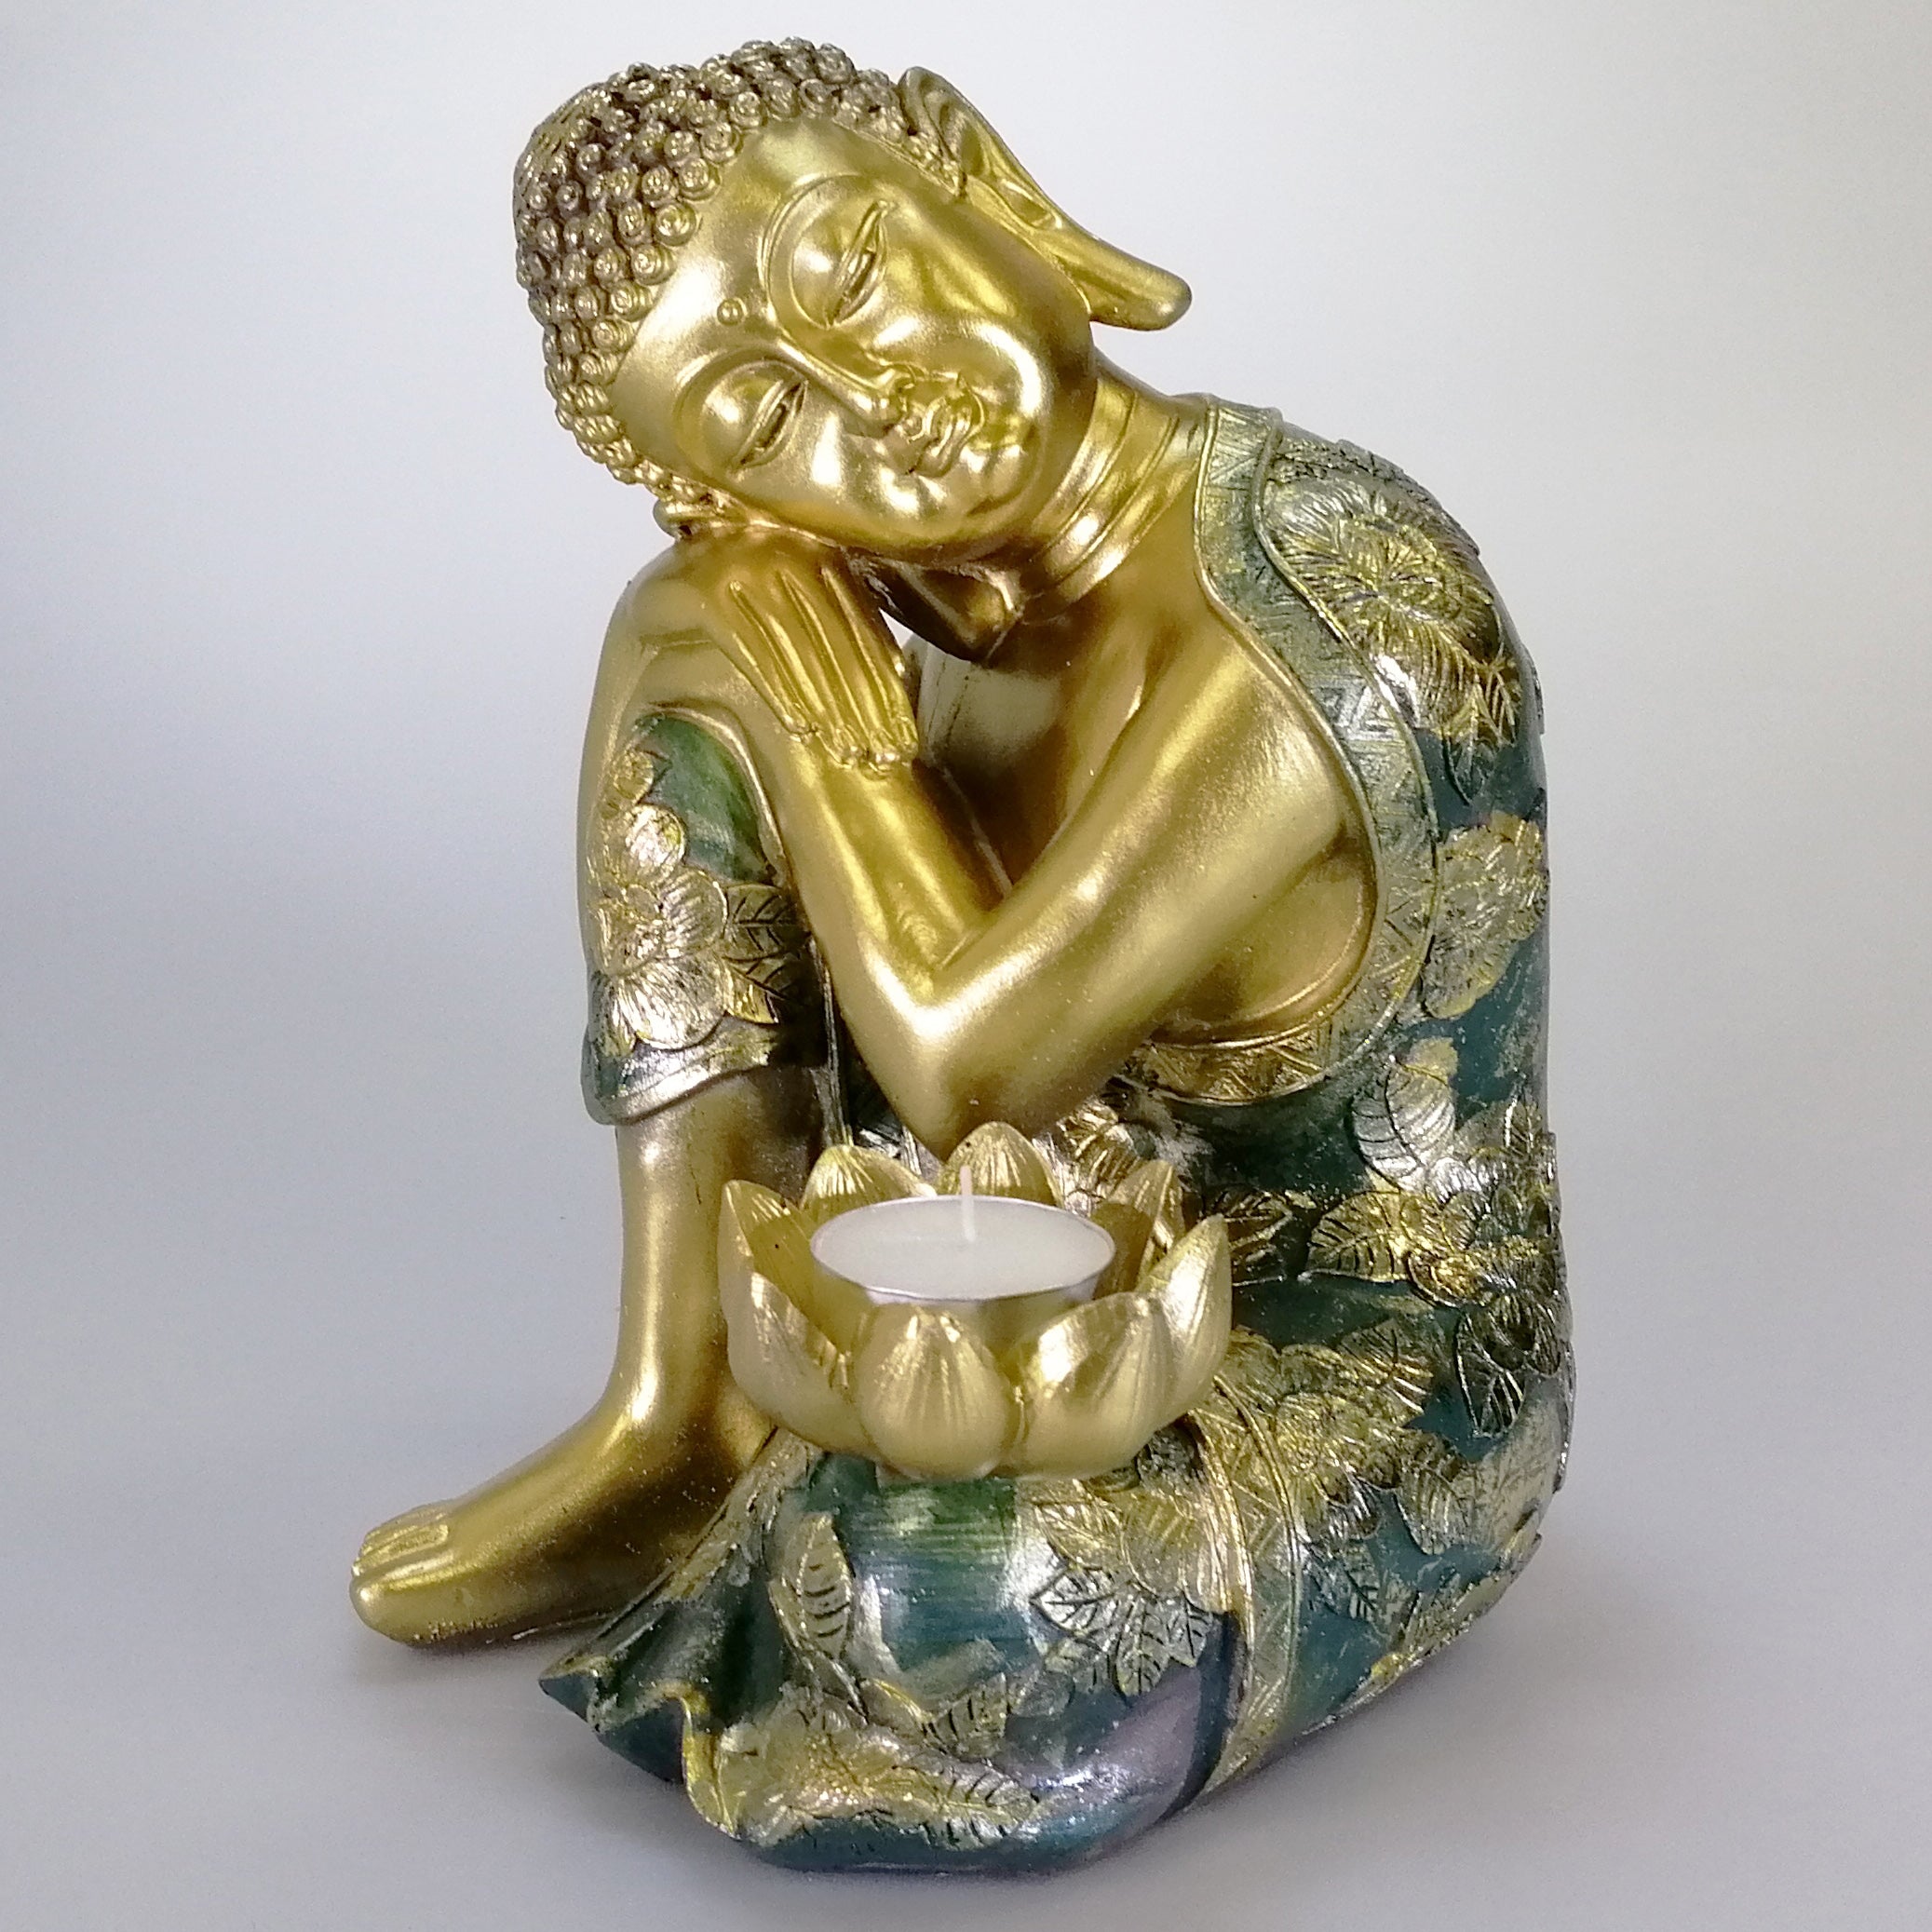 Buddha Figure - Painted Green and Gold - Tealight Holder